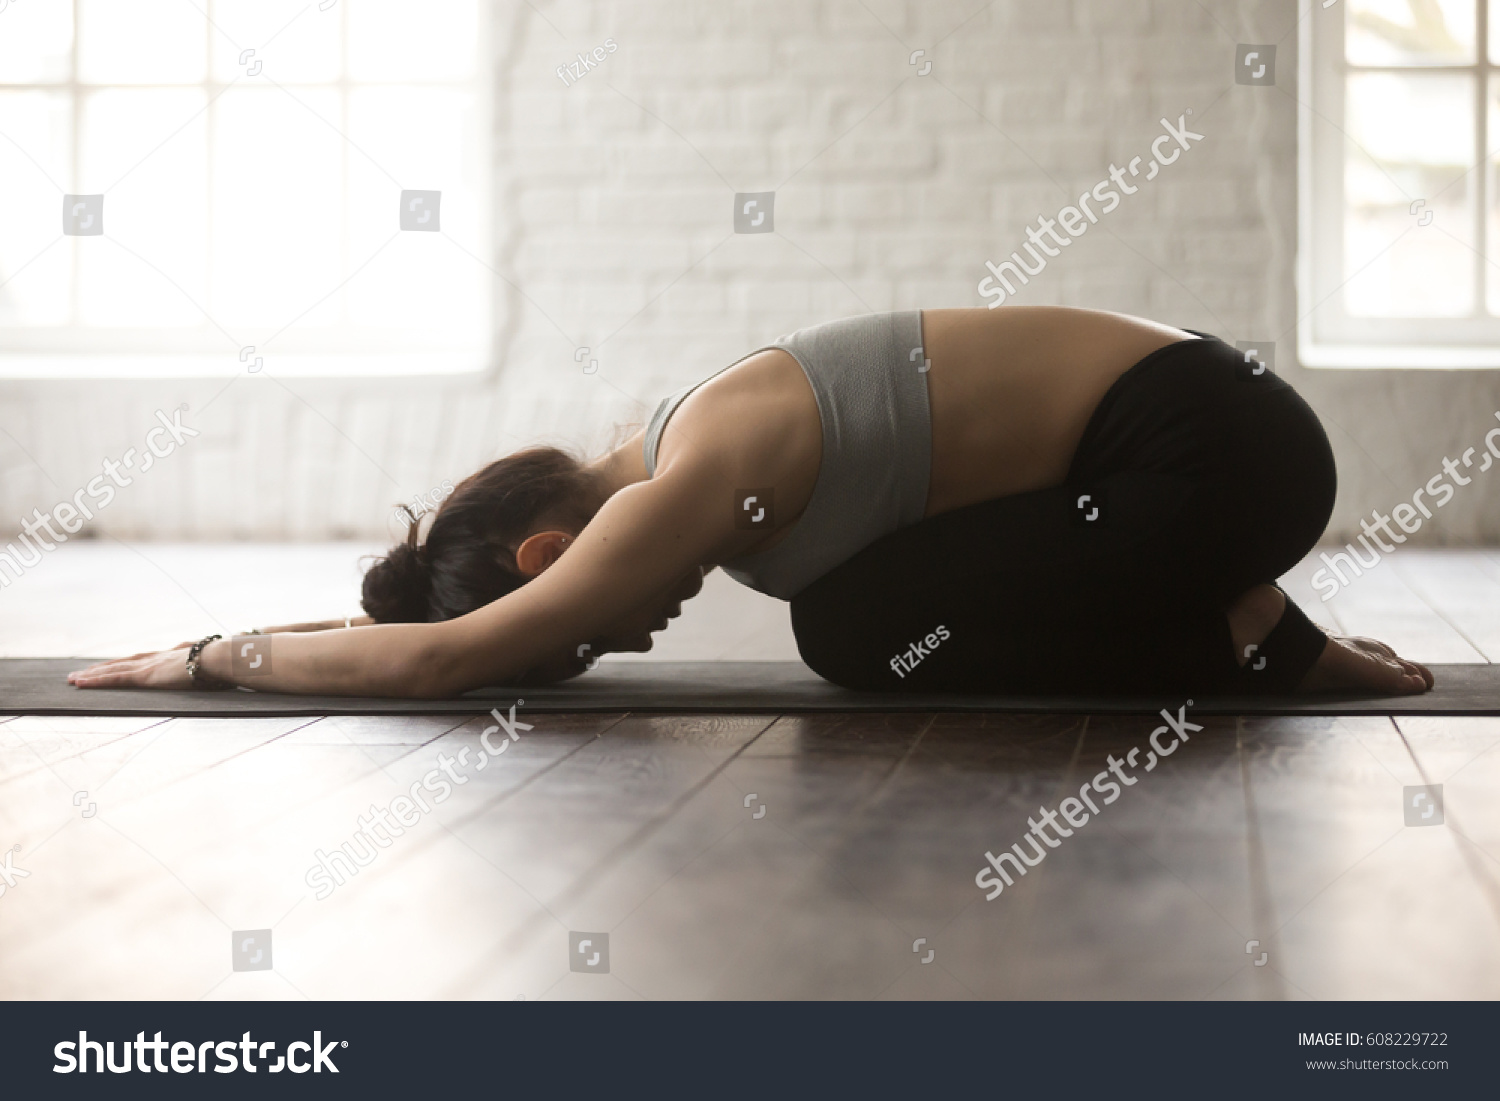 Young attractive sporty yogi woman practicing yoga concept, sitting in Child exercise, Balasana pose, working out, wearing black sportswear, full length, white loft studio background, side view #608229722